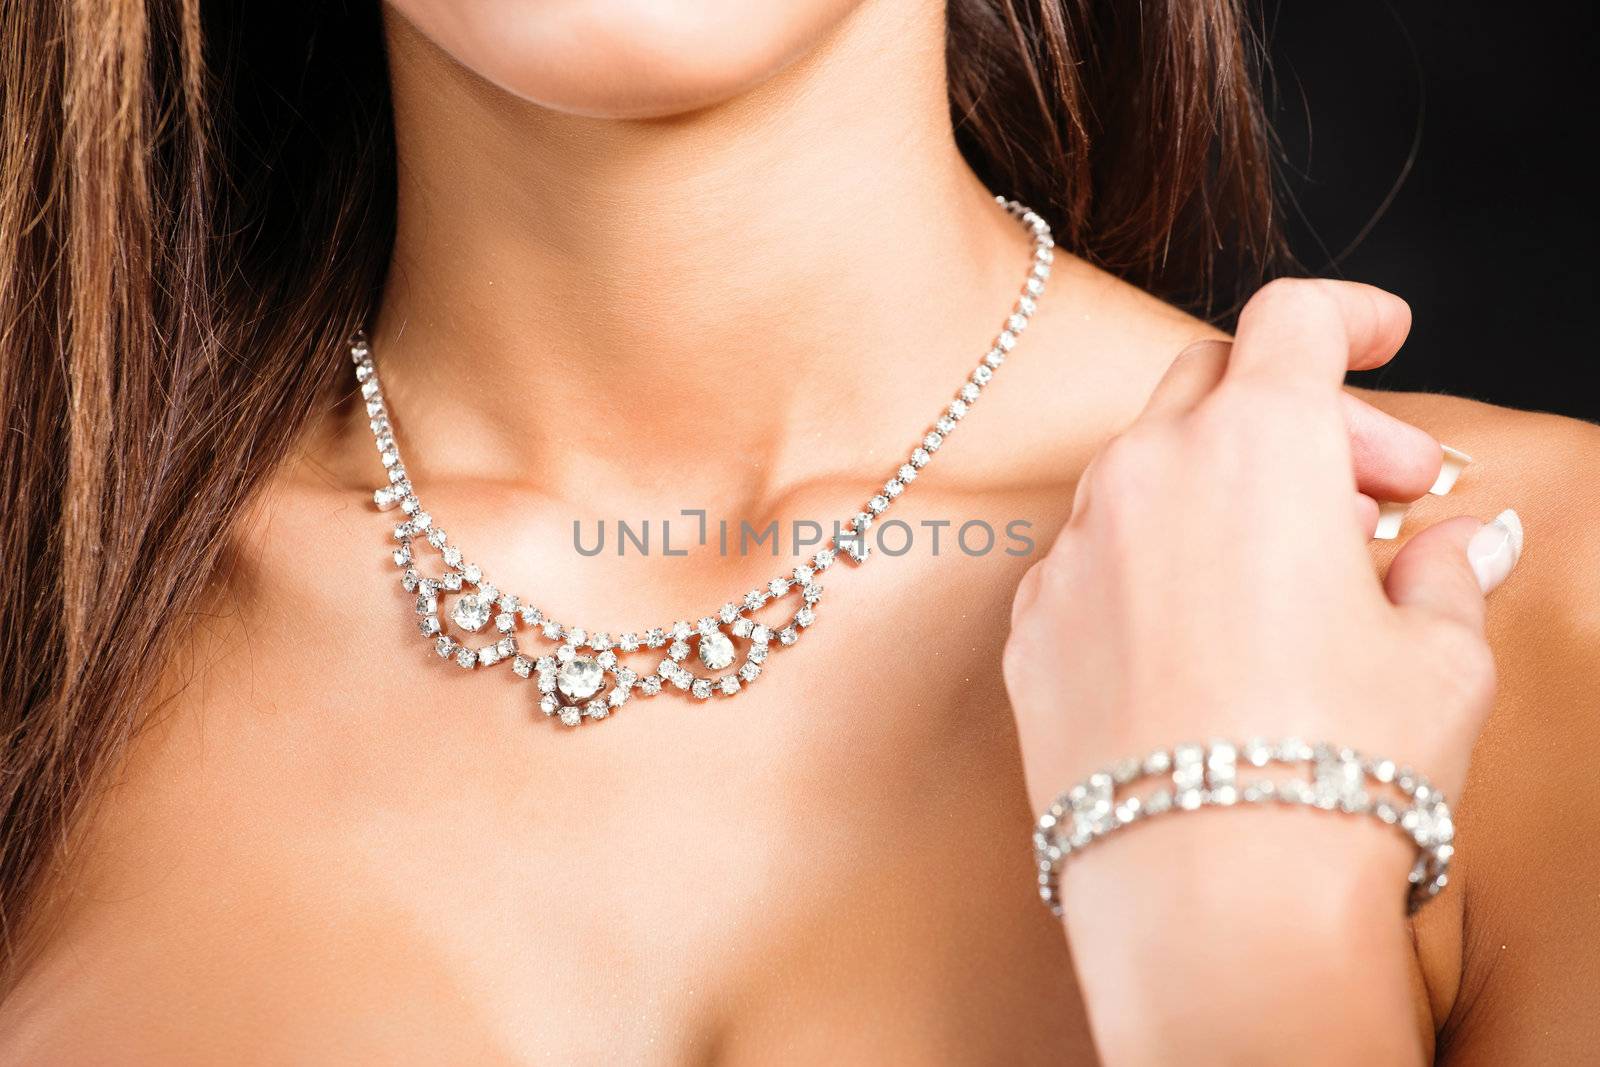 necklace on woman's neck by imarin